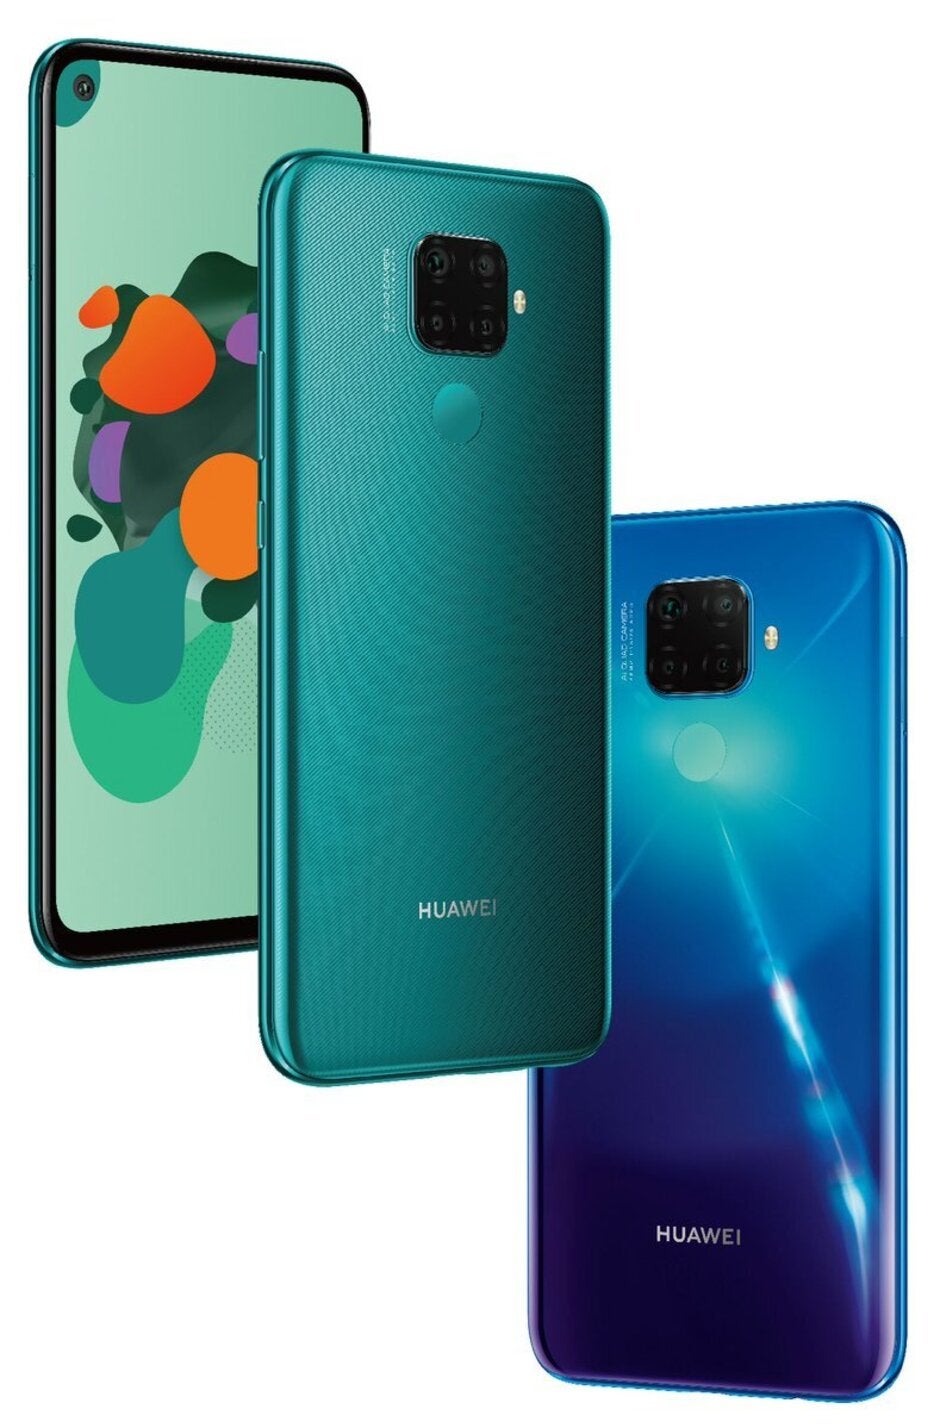 Leaked Huawei Mate 30 series promo images reveal four models